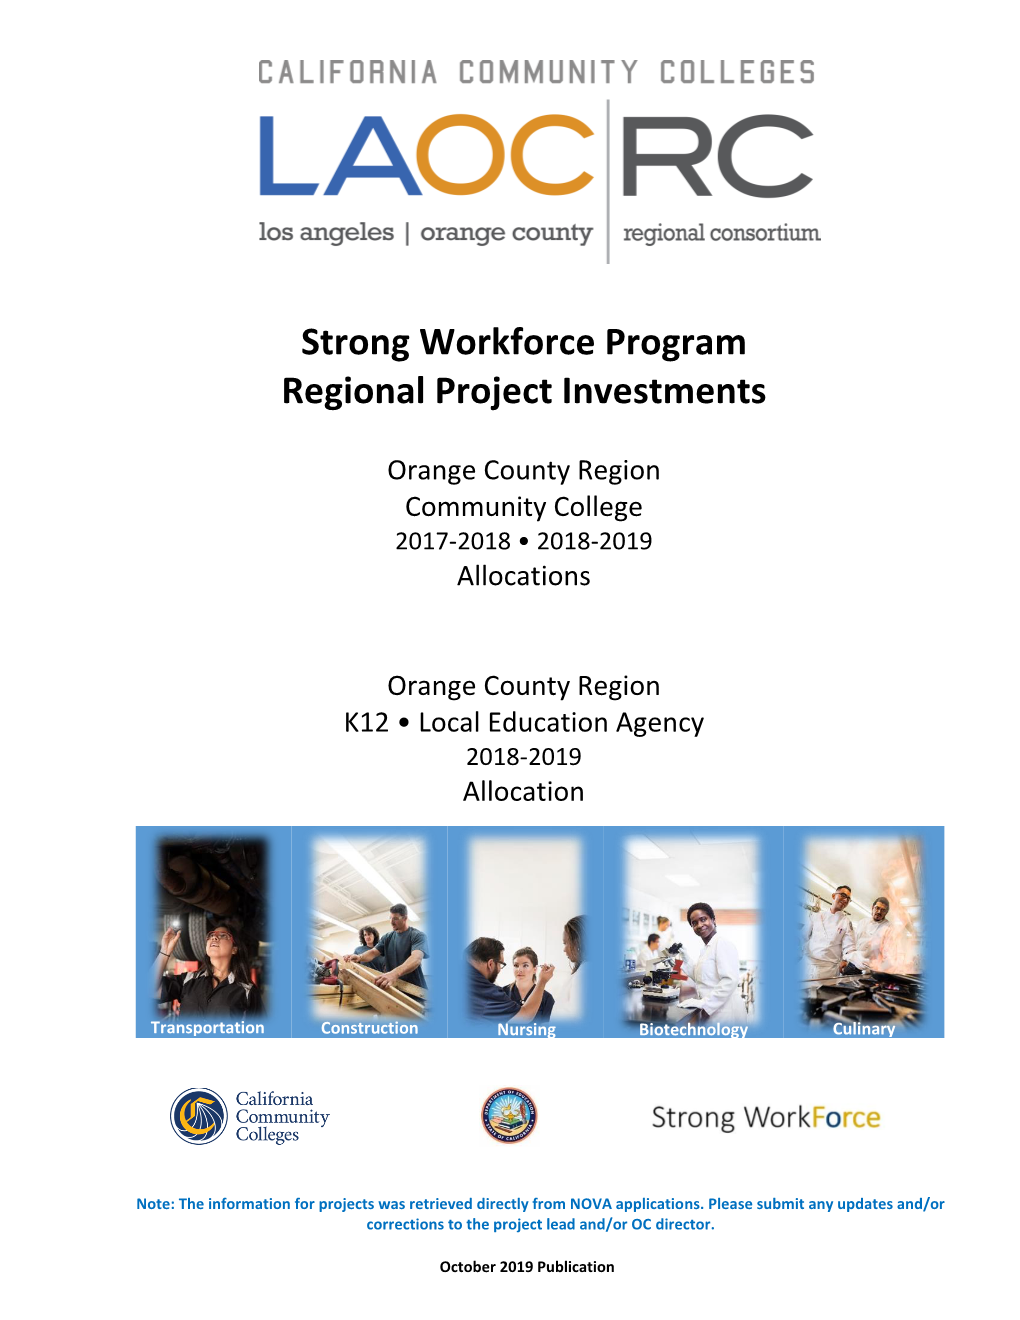 Strong Workforce Program Regional Project Investments